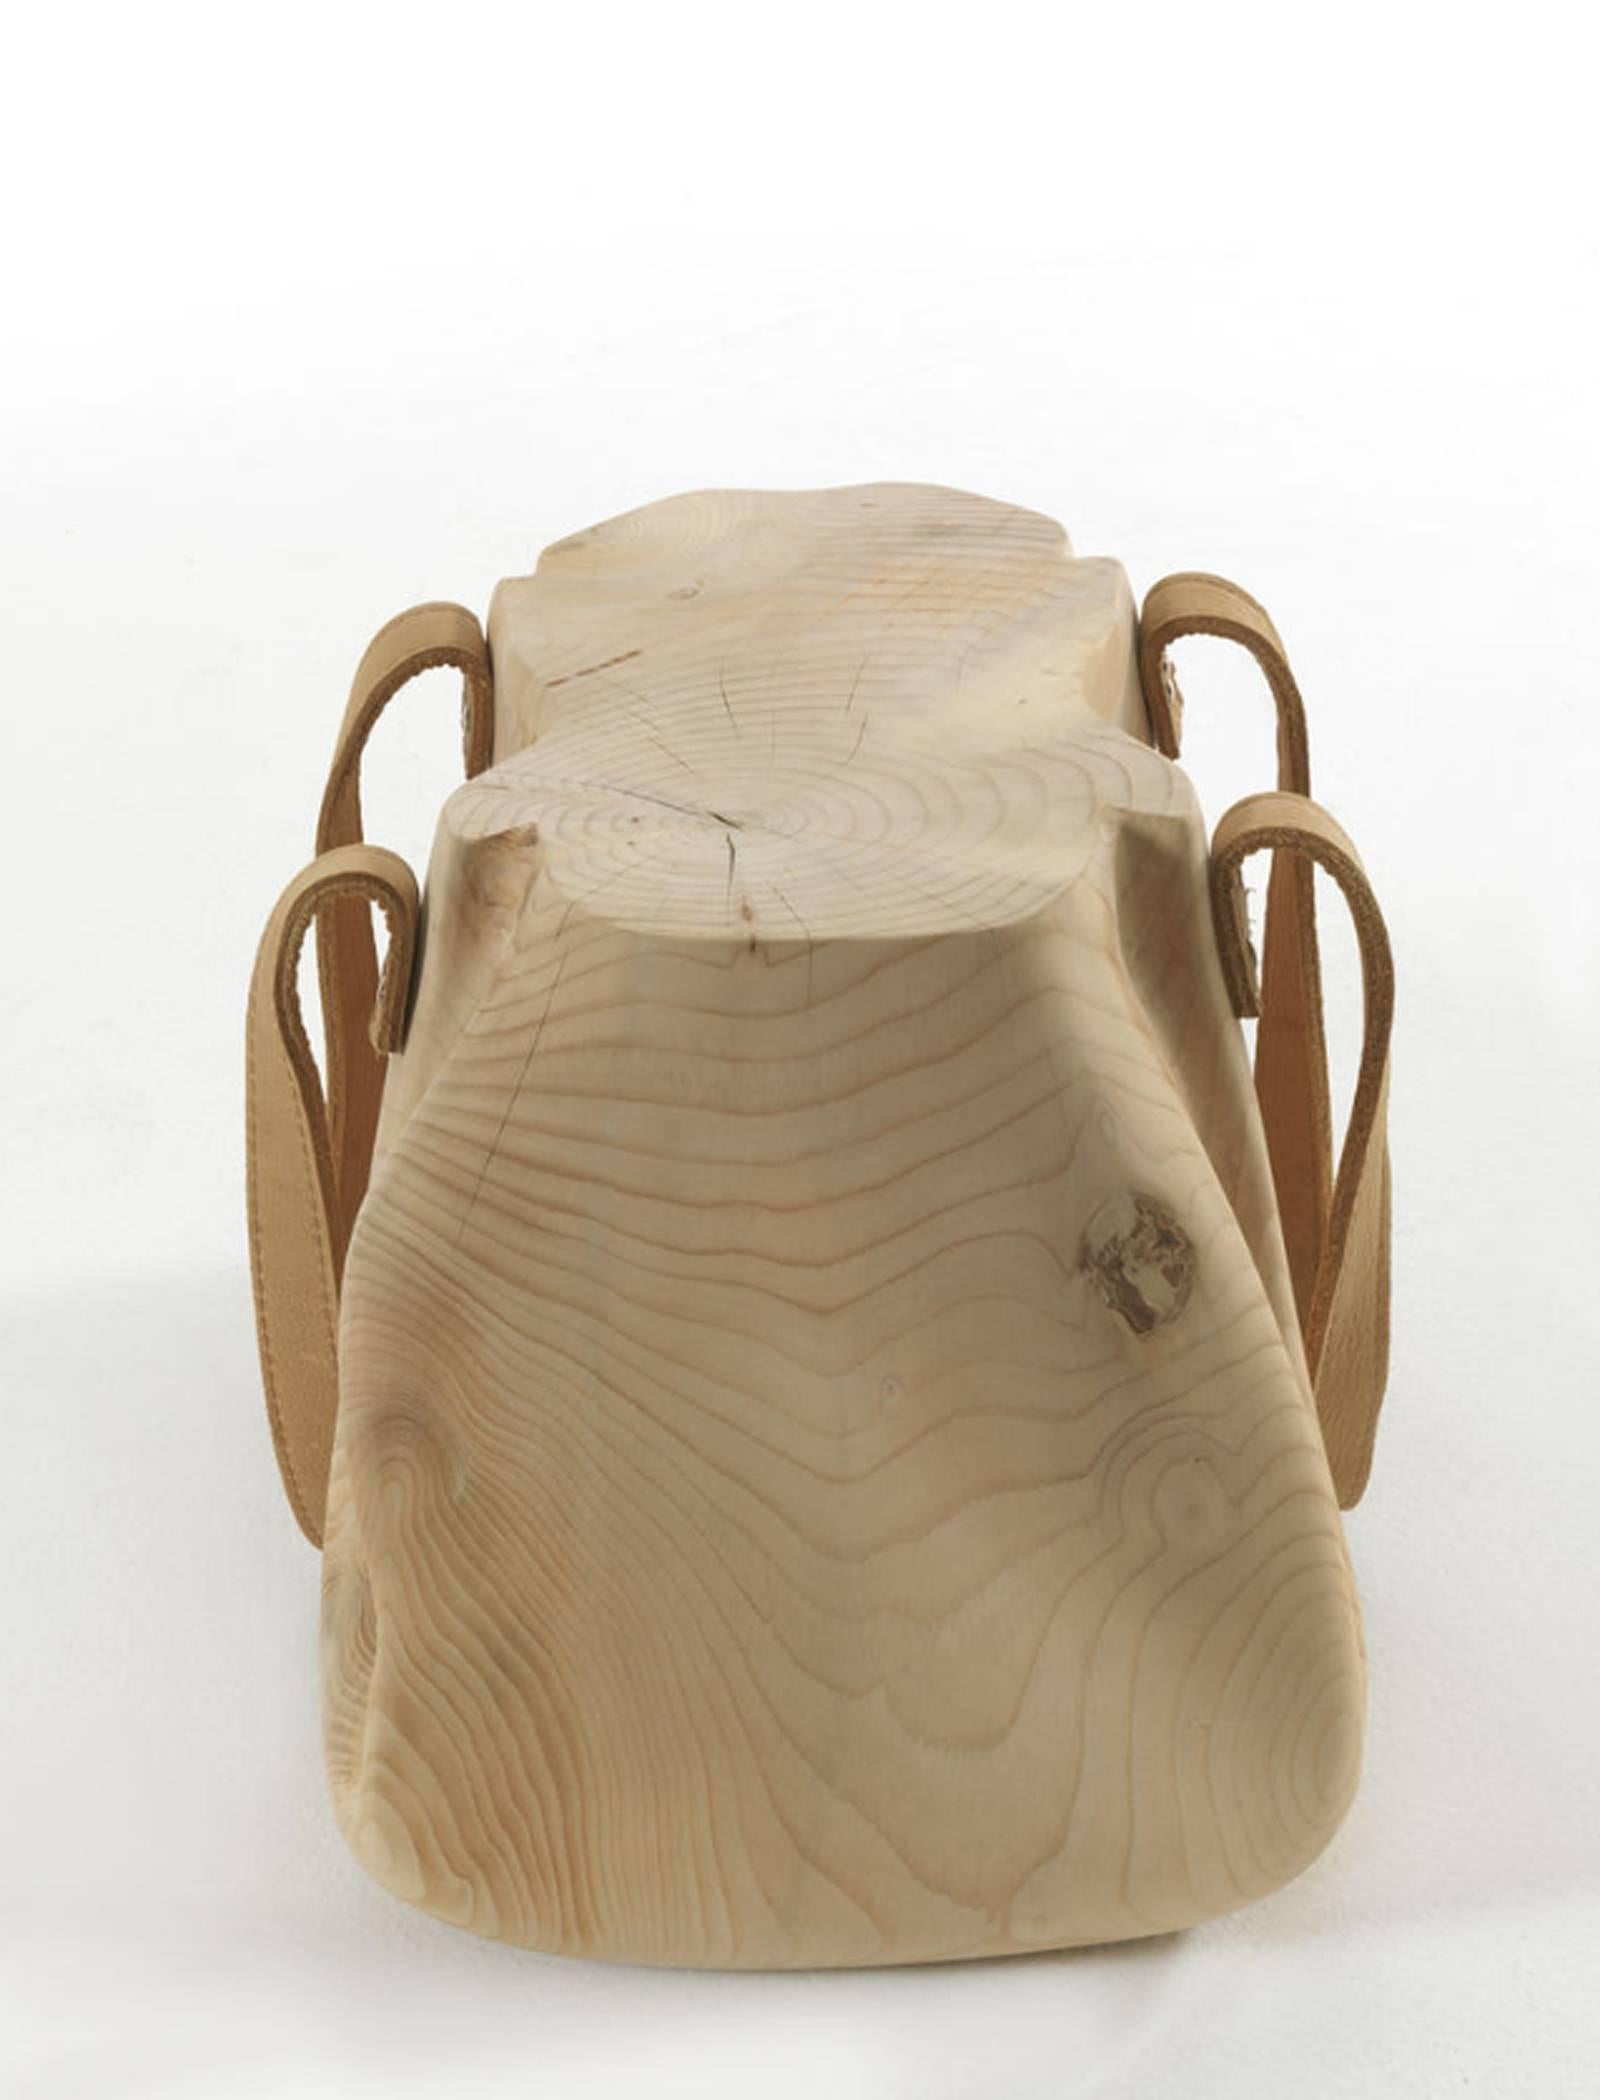 Contemporary Bag Stool in Solid Natural Cedar Wood Hand-Carved with Leather For Sale